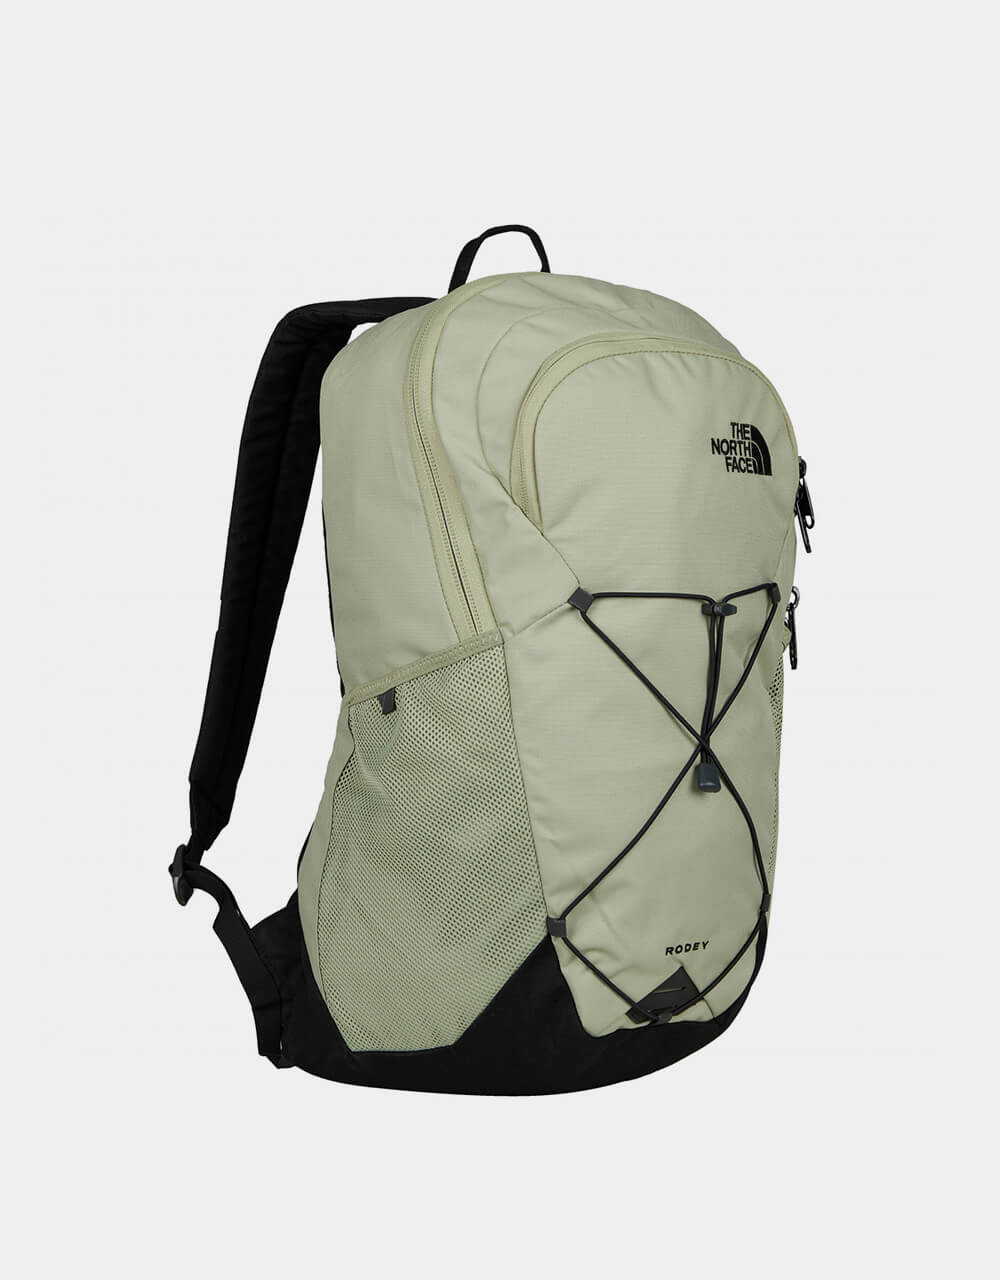 The North Face Rodey Backpack - Tea Green/TNF Black – Route One